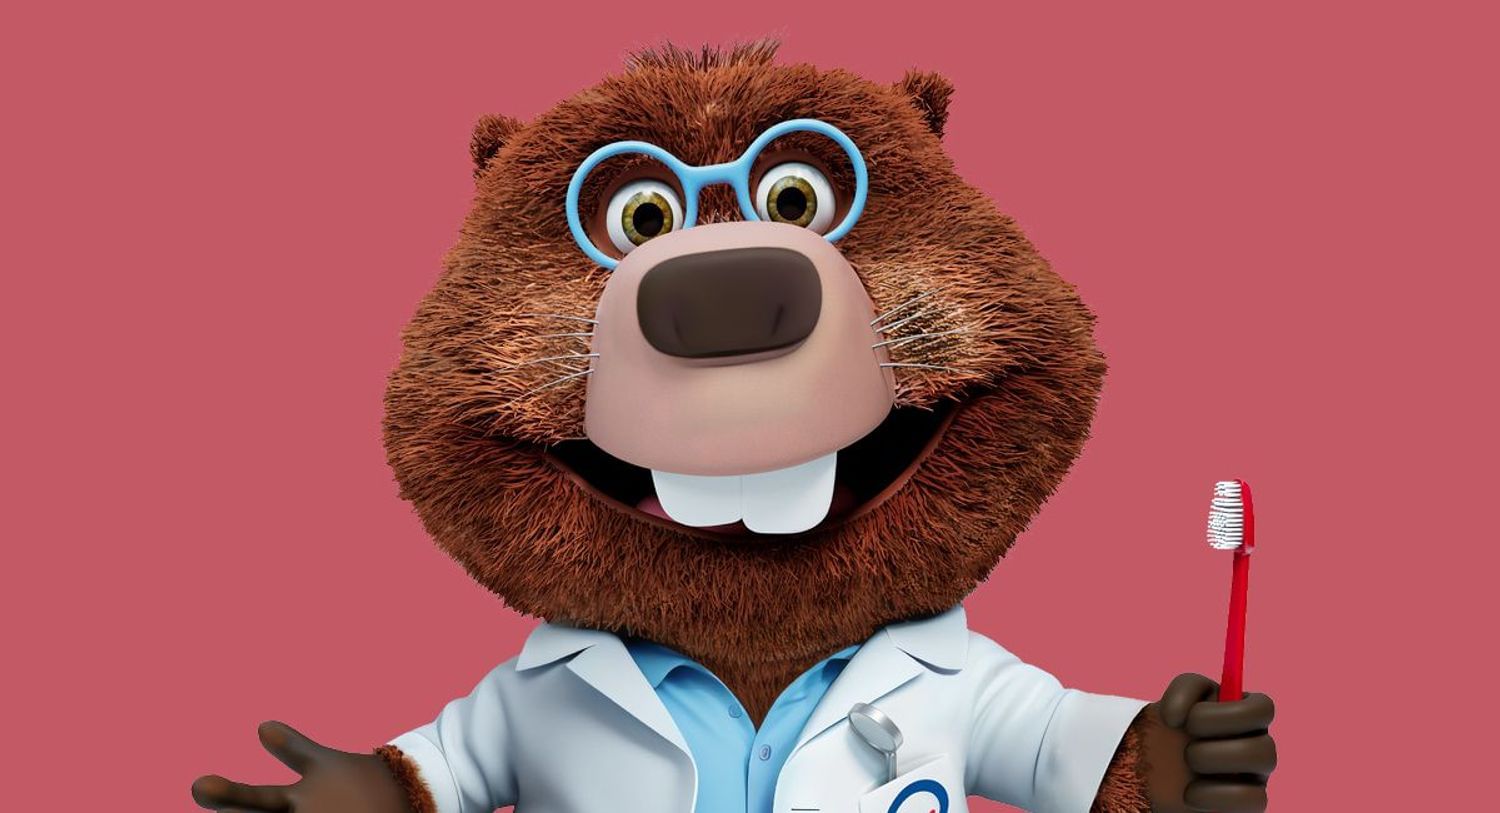 Artwork for new World Oral Health Day mascot Toothie the Beaver